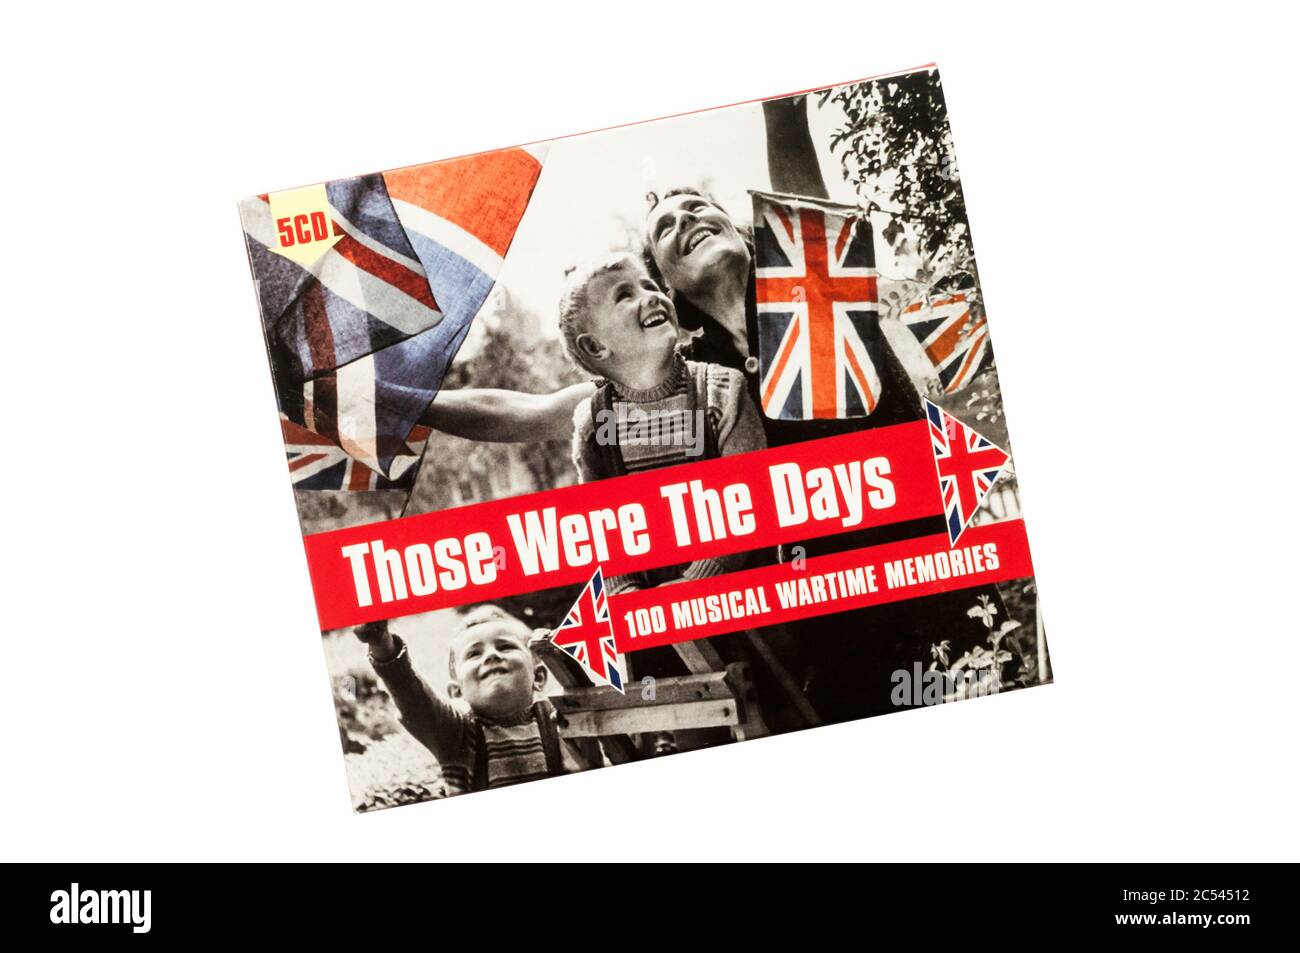 5 CD dal titolo Those Were the Days, 100 Musical Wartime Memories. Foto Stock